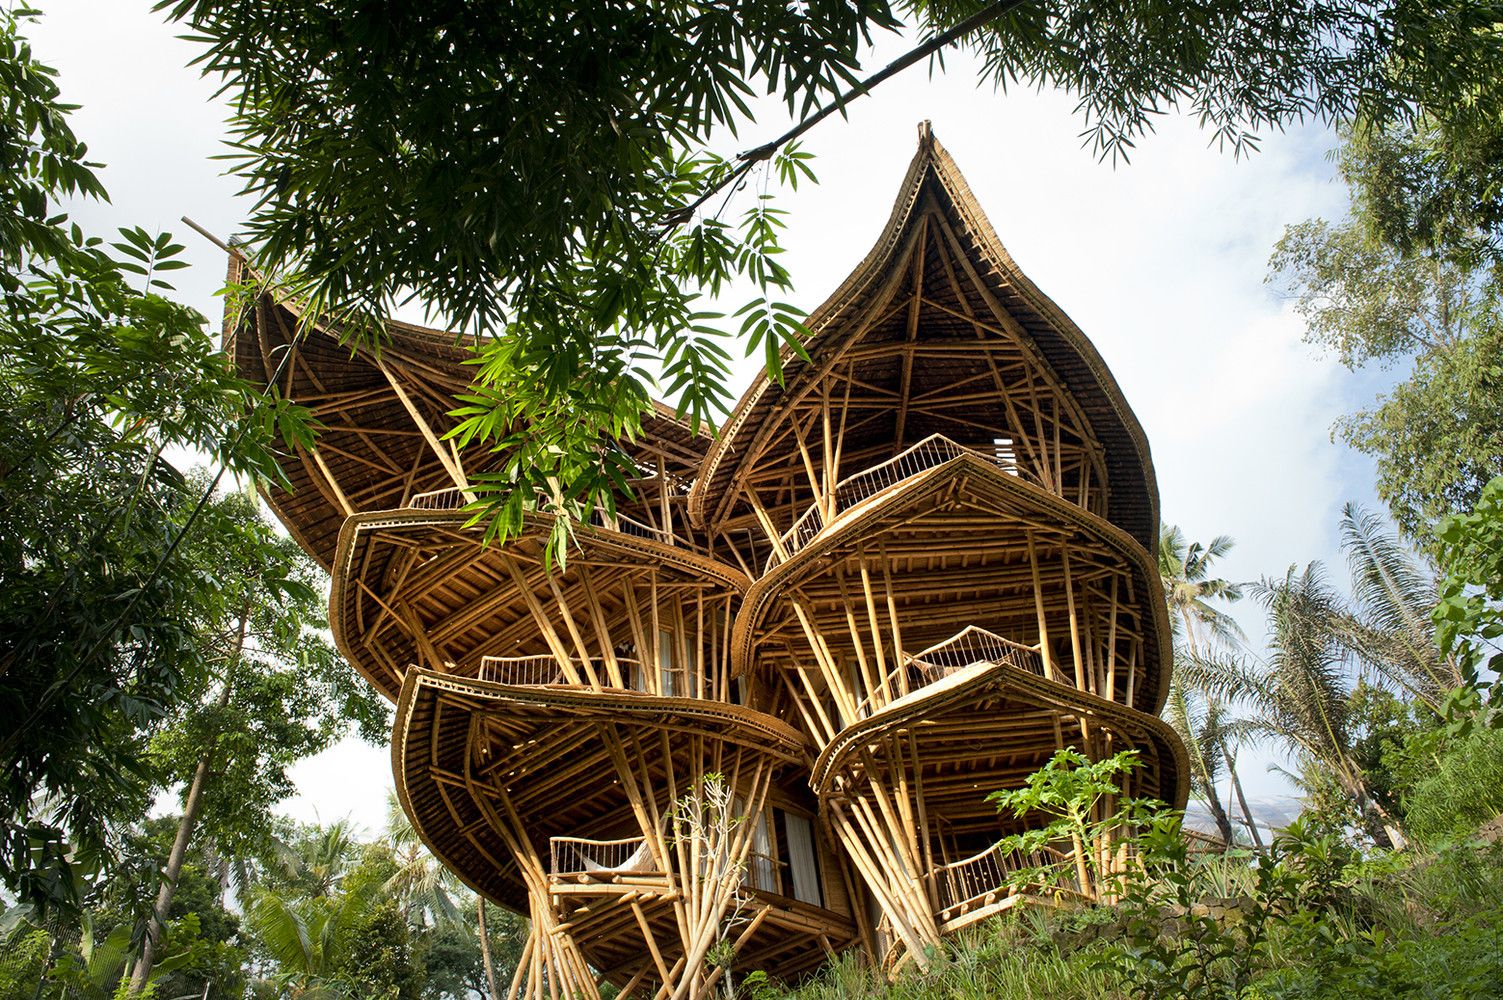 bamboo architectural building, featuring leaf-like forms and multiple storeys made from bamboo trunks.